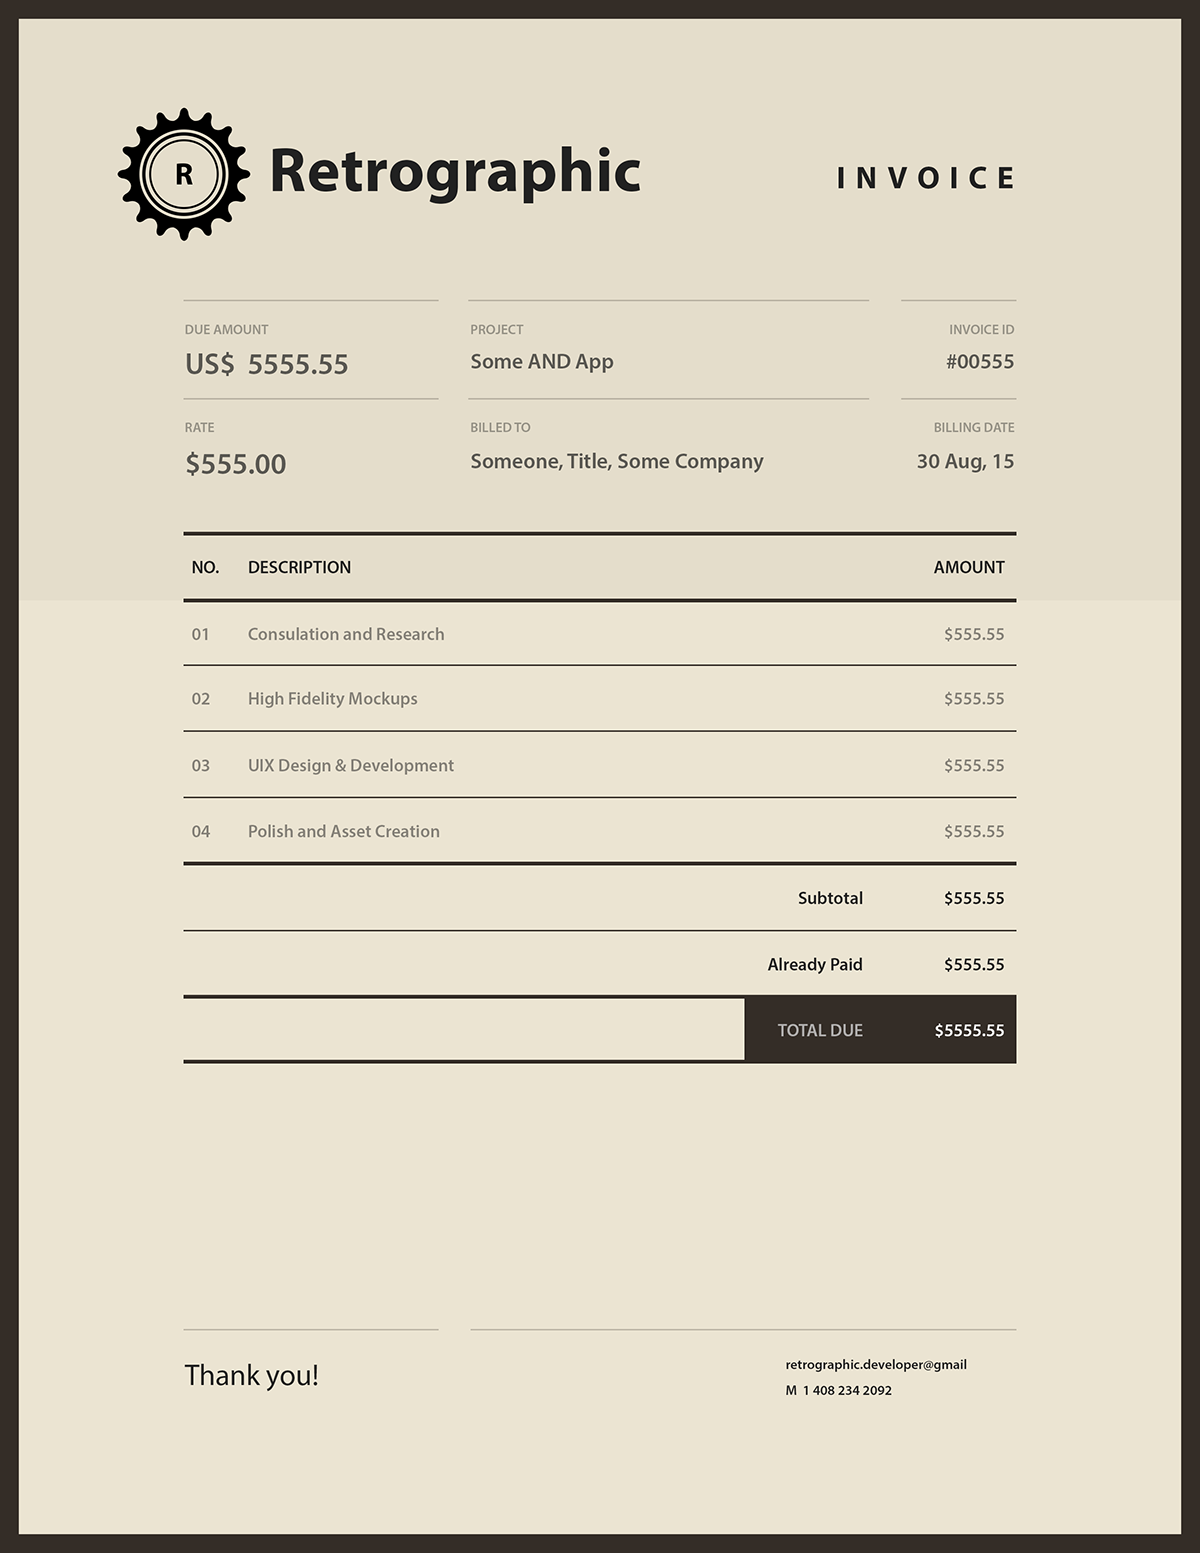 retrographic information invoice bill designed receipt payment customer thank you Layout pdf template Sprocket inspired dribbble